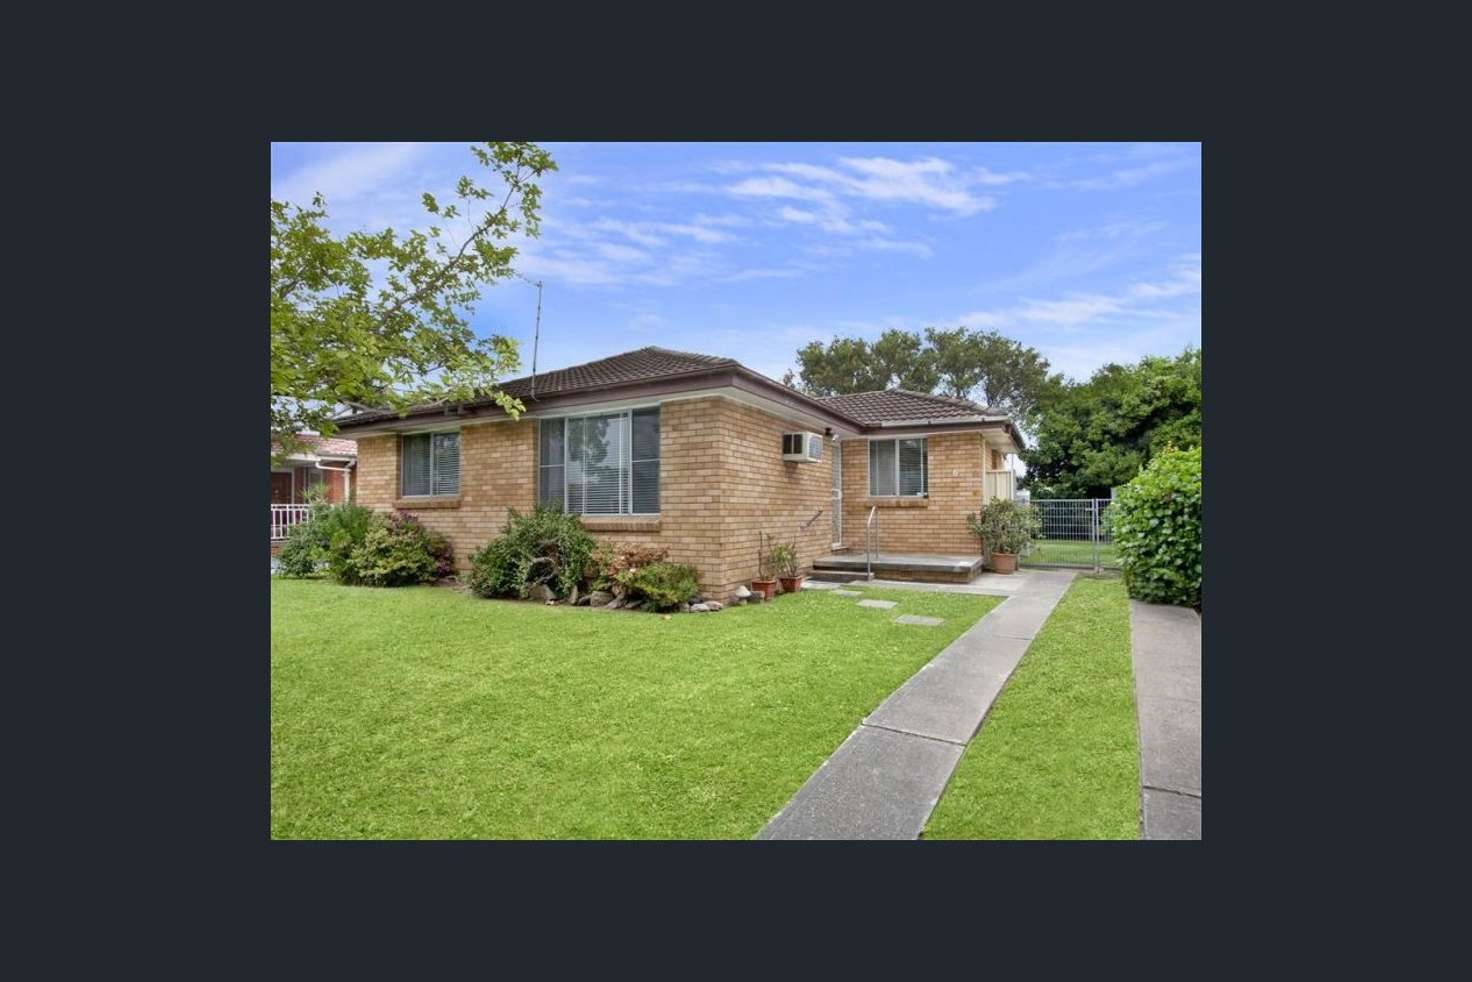 Main view of Homely house listing, 6 KINGSLEA PLACE, Canley Heights NSW 2166